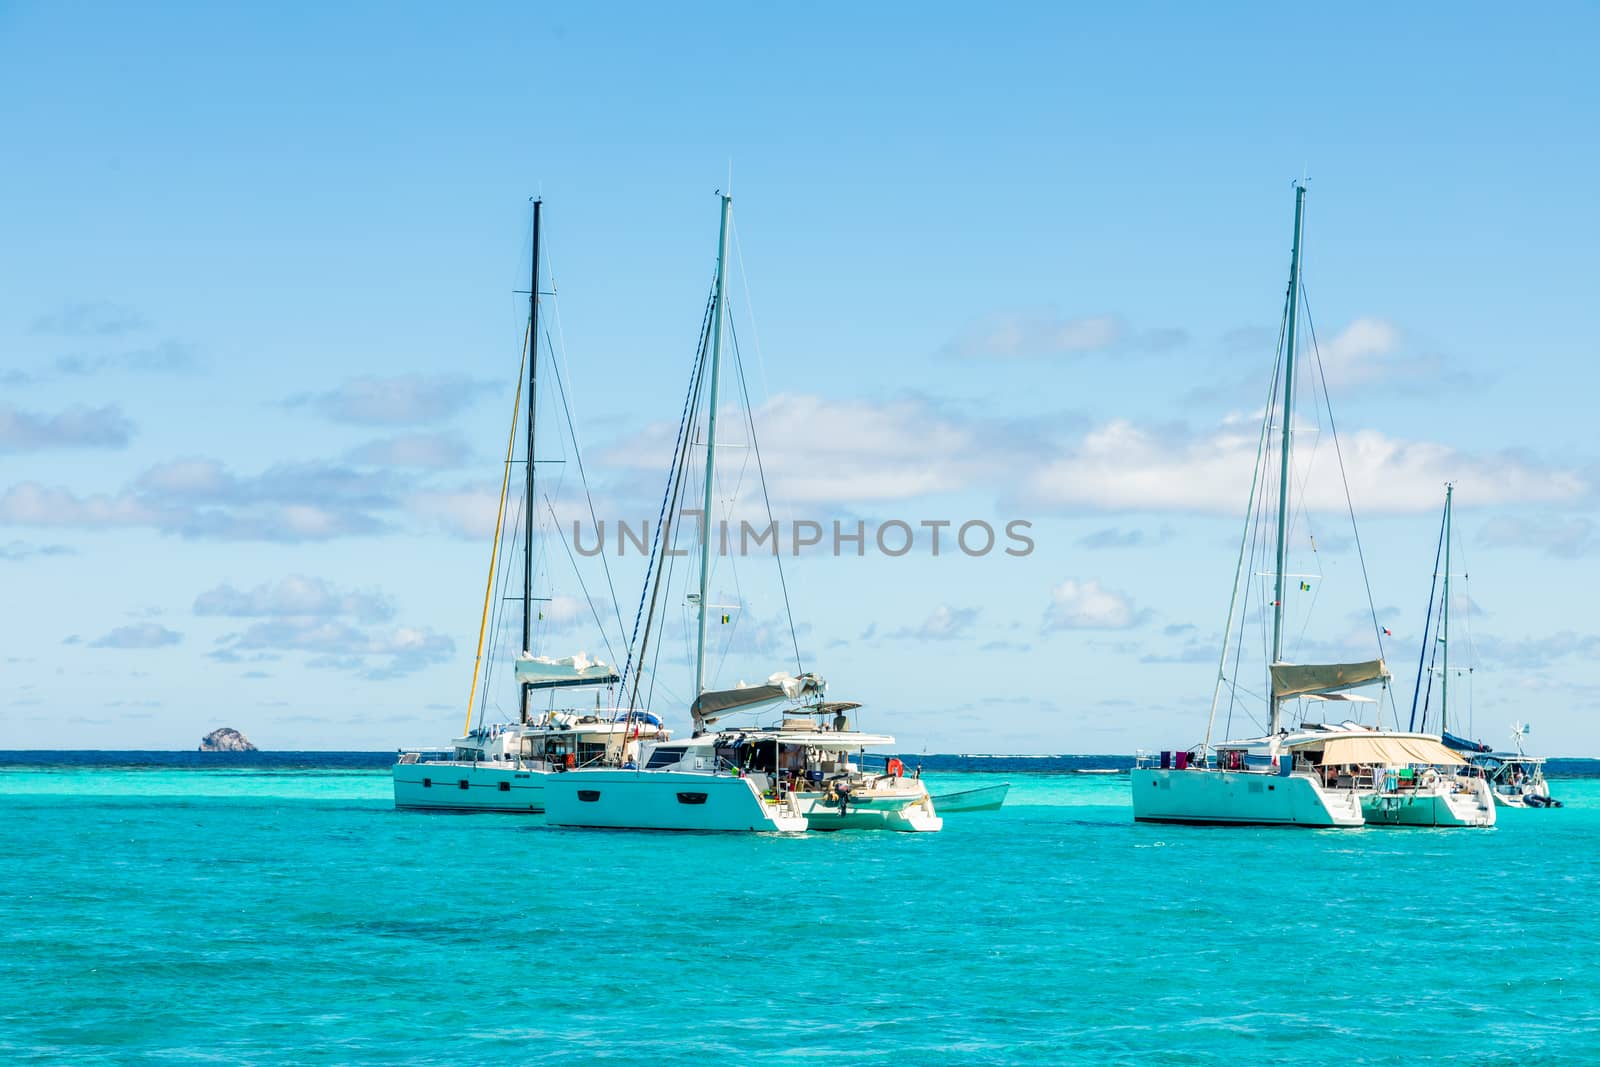 Turquoise colored sea with ancored catamarans, Tobago Cays, Saint Vincent and the Grenadines, Caribbean sea